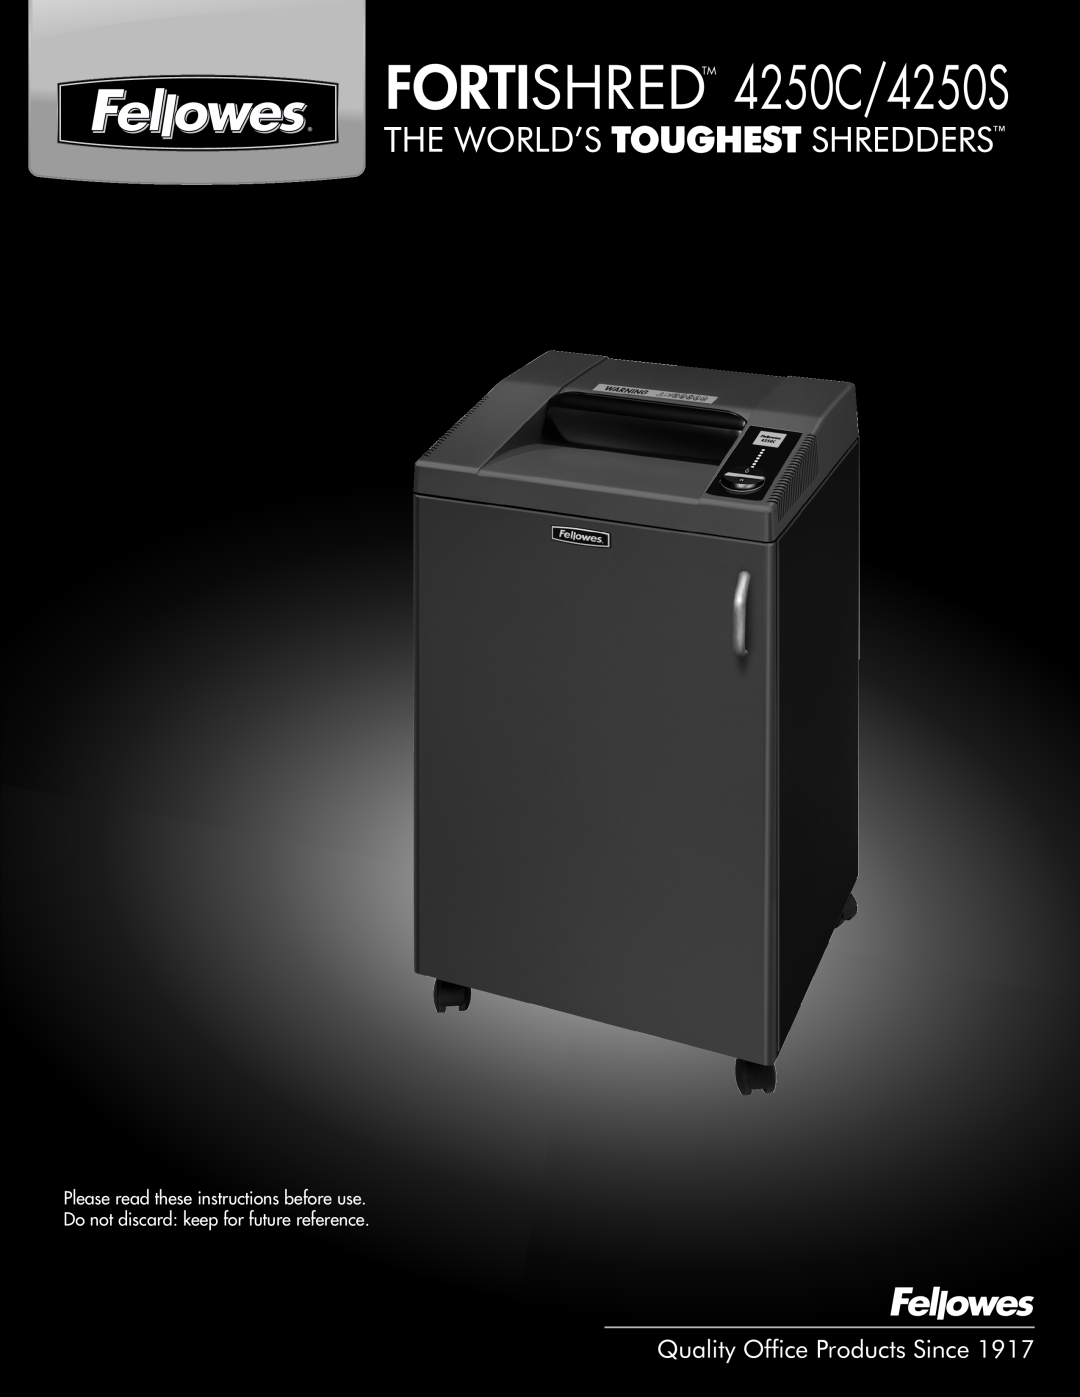 Fellowes manual FORTISHREDTM 4250C/4250S, Quality Office Products Since 